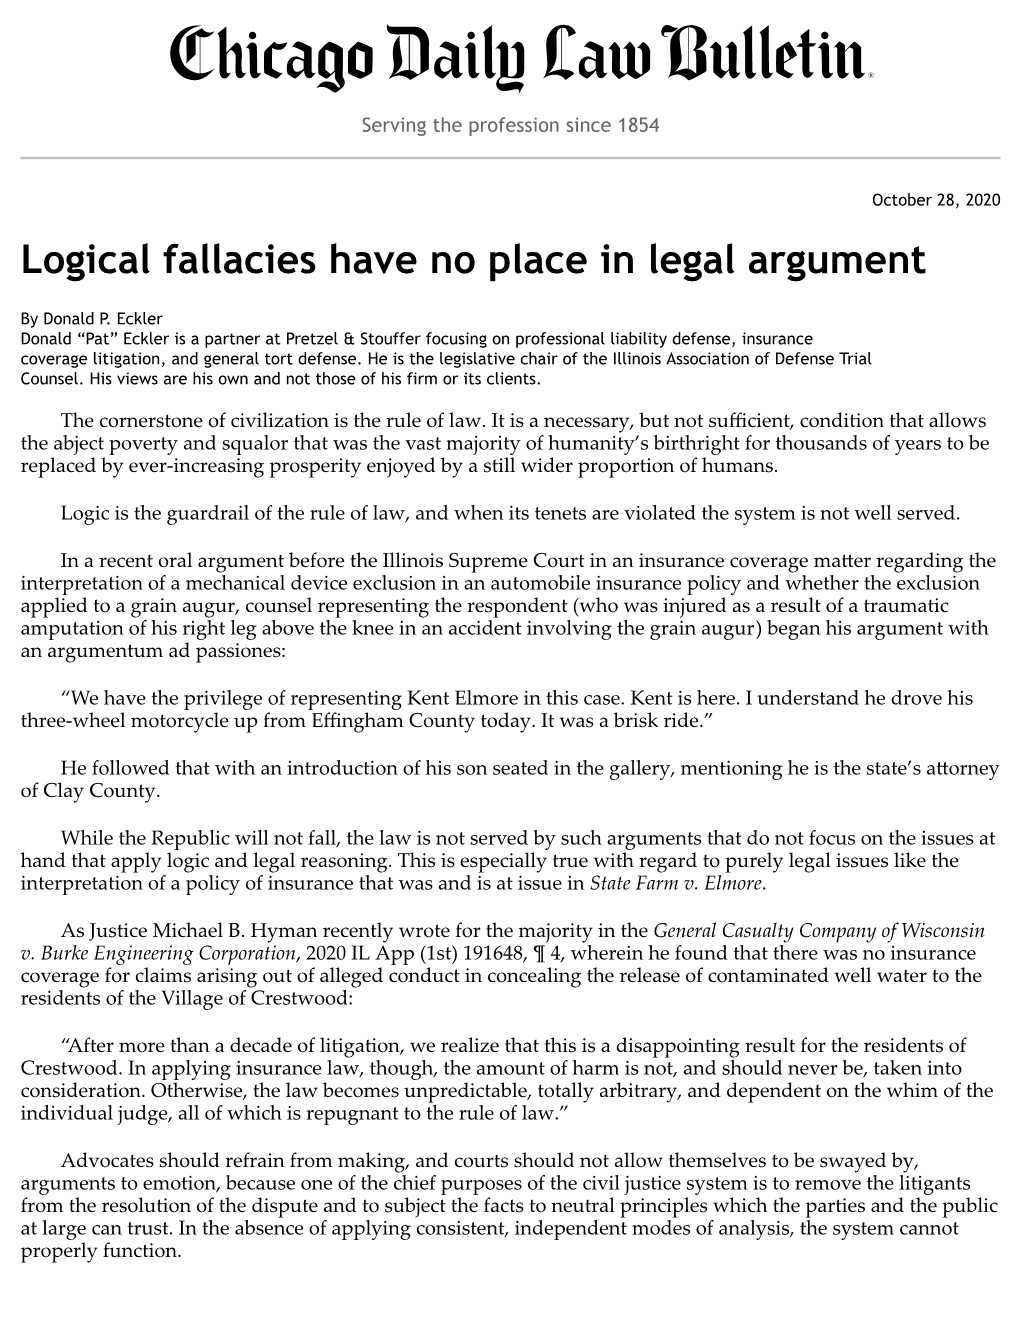 Logical Fallacies Have No Place in Legal Argument